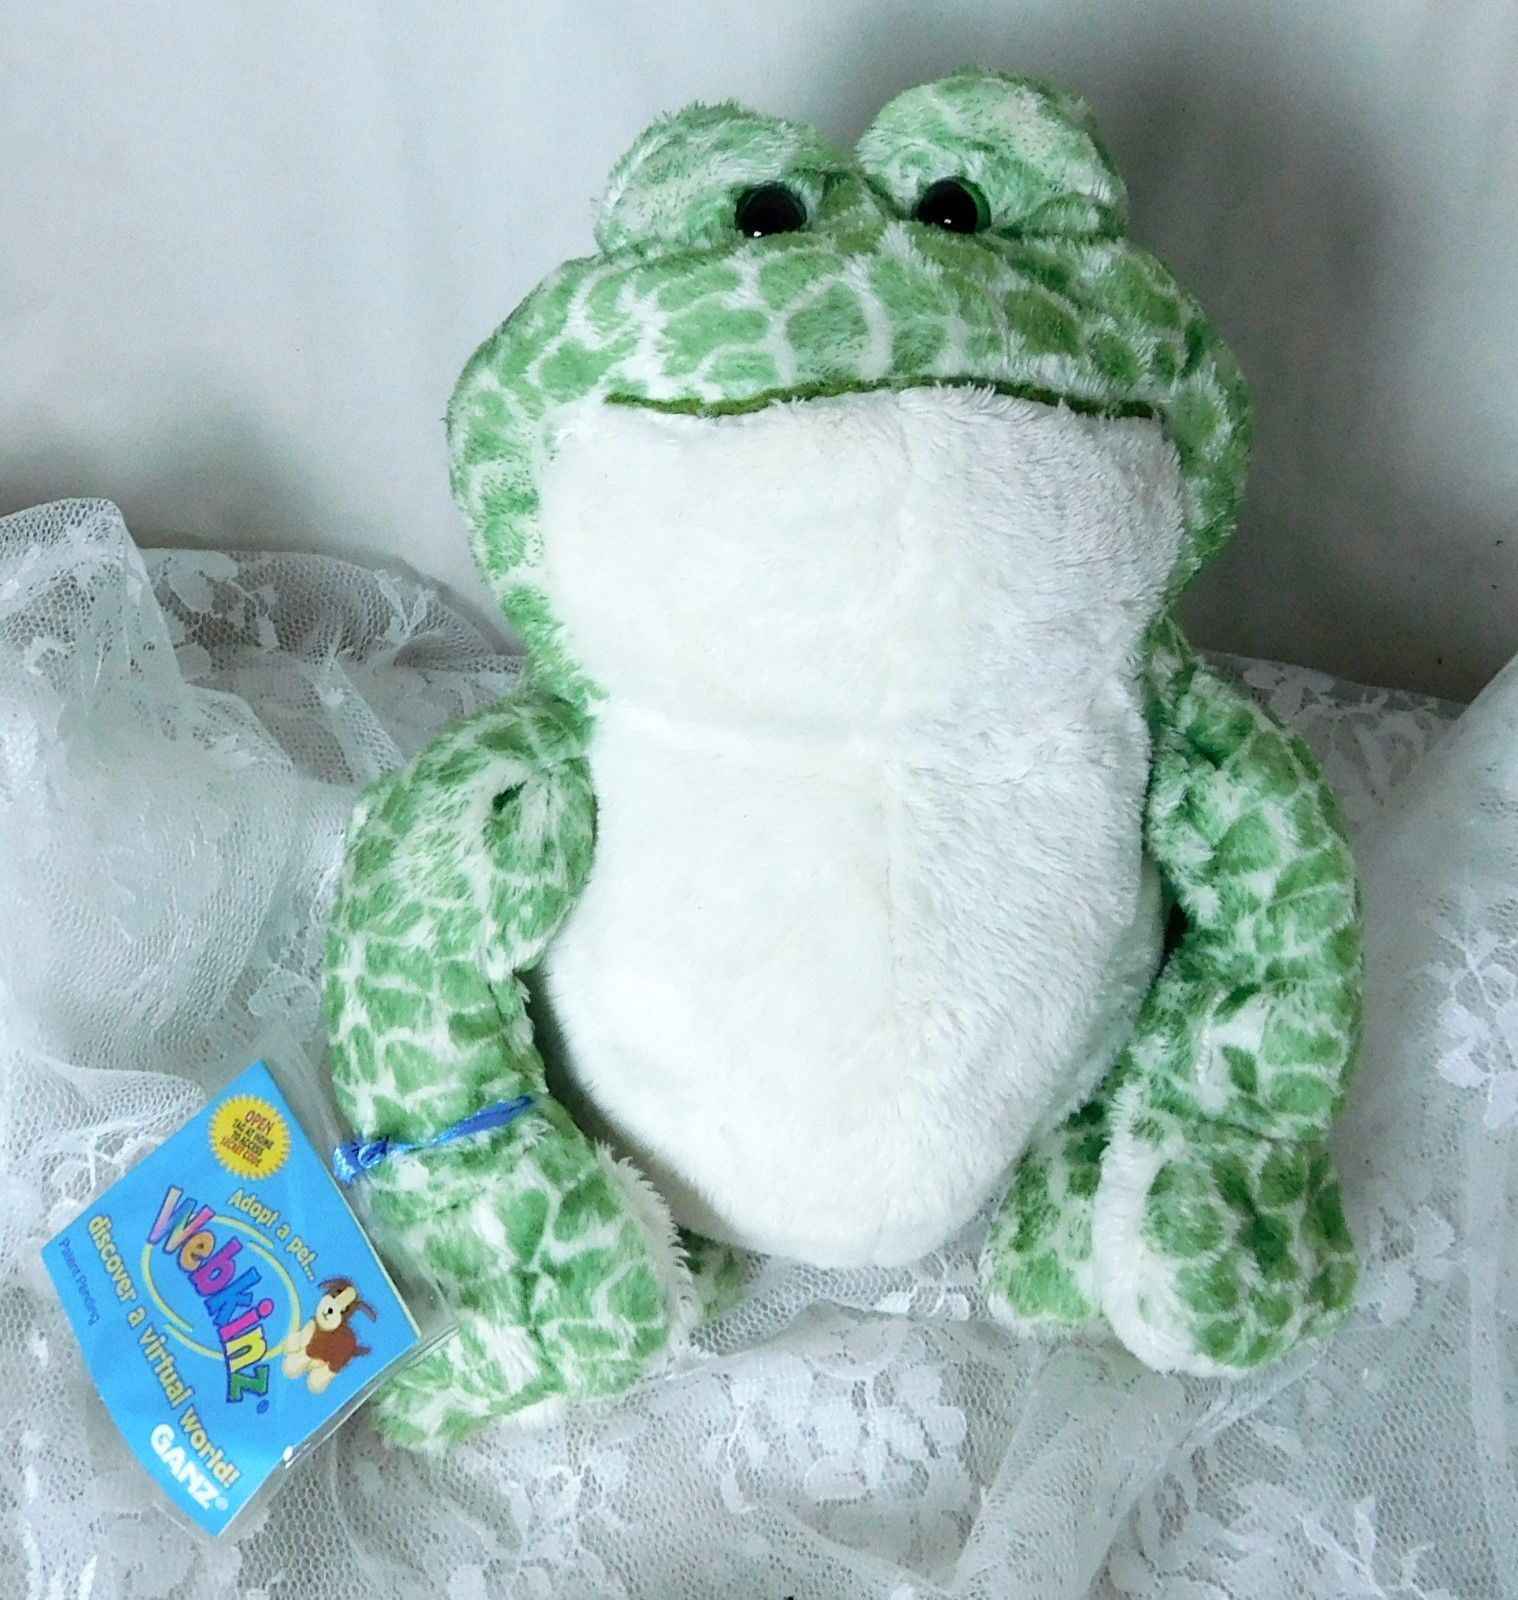 8" Bean Plush Webkinz Green Spotted Frog w/ Sealed Code HM142 